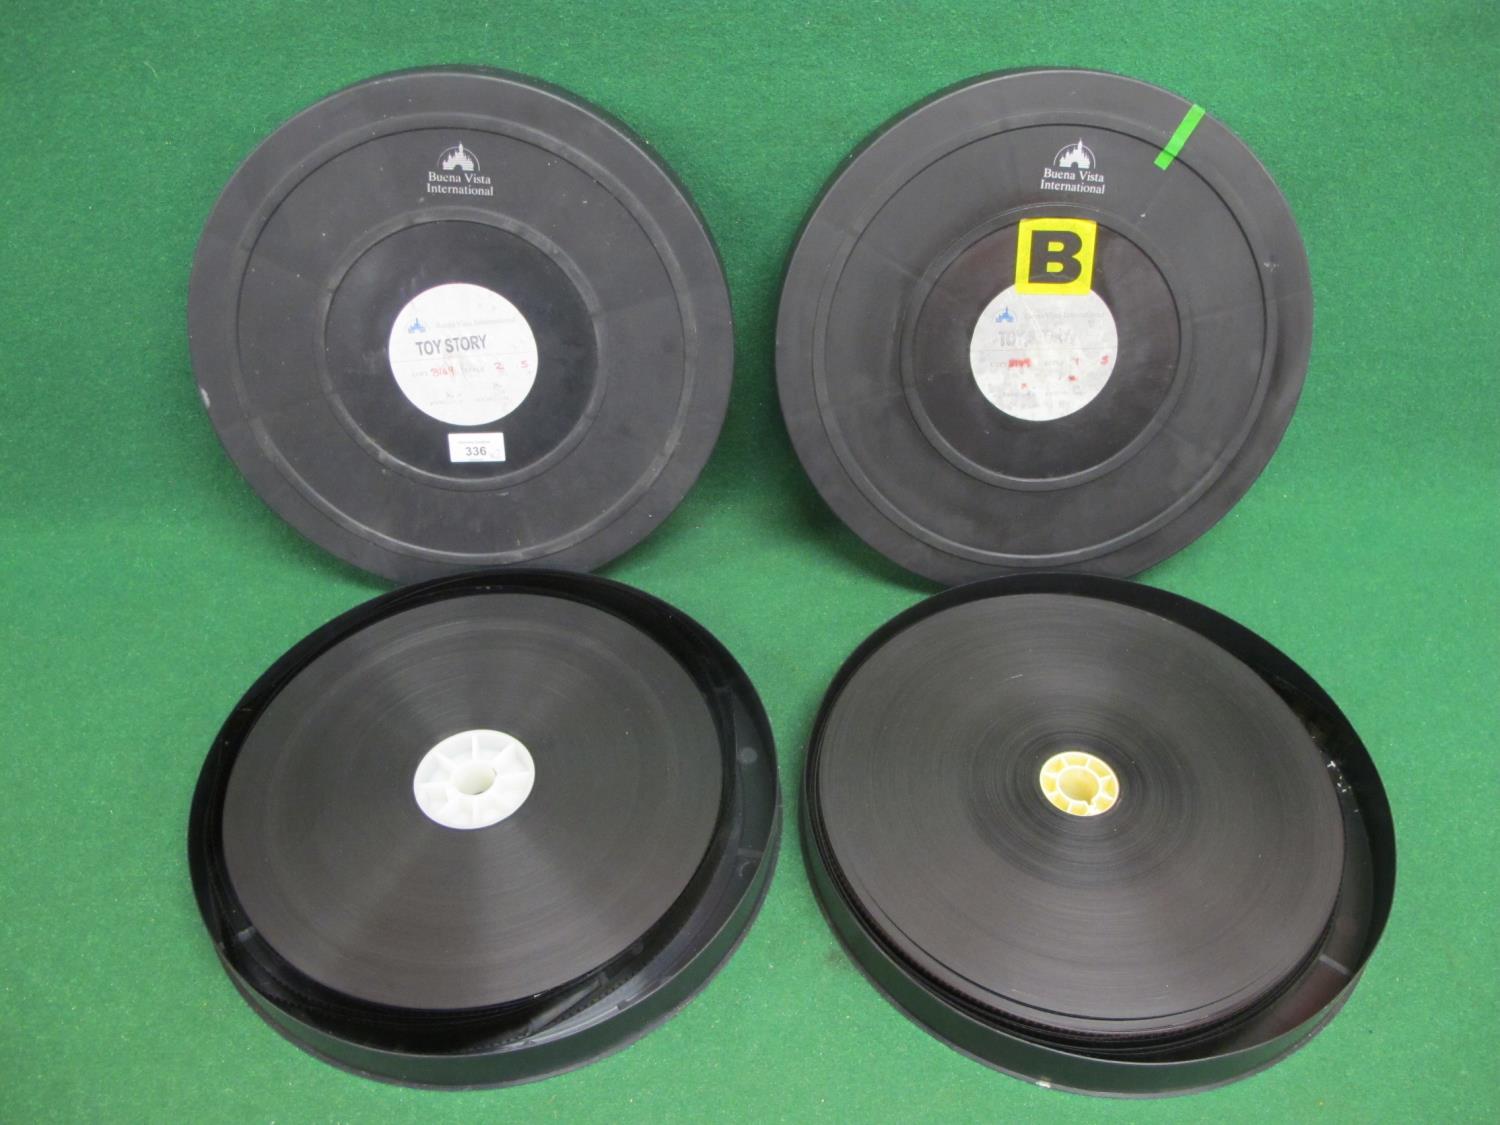 Cased 35mm film reels 1 & 2 (of 5)Copy 8149 for Buena Vista International Toy Story - 14.75" dia